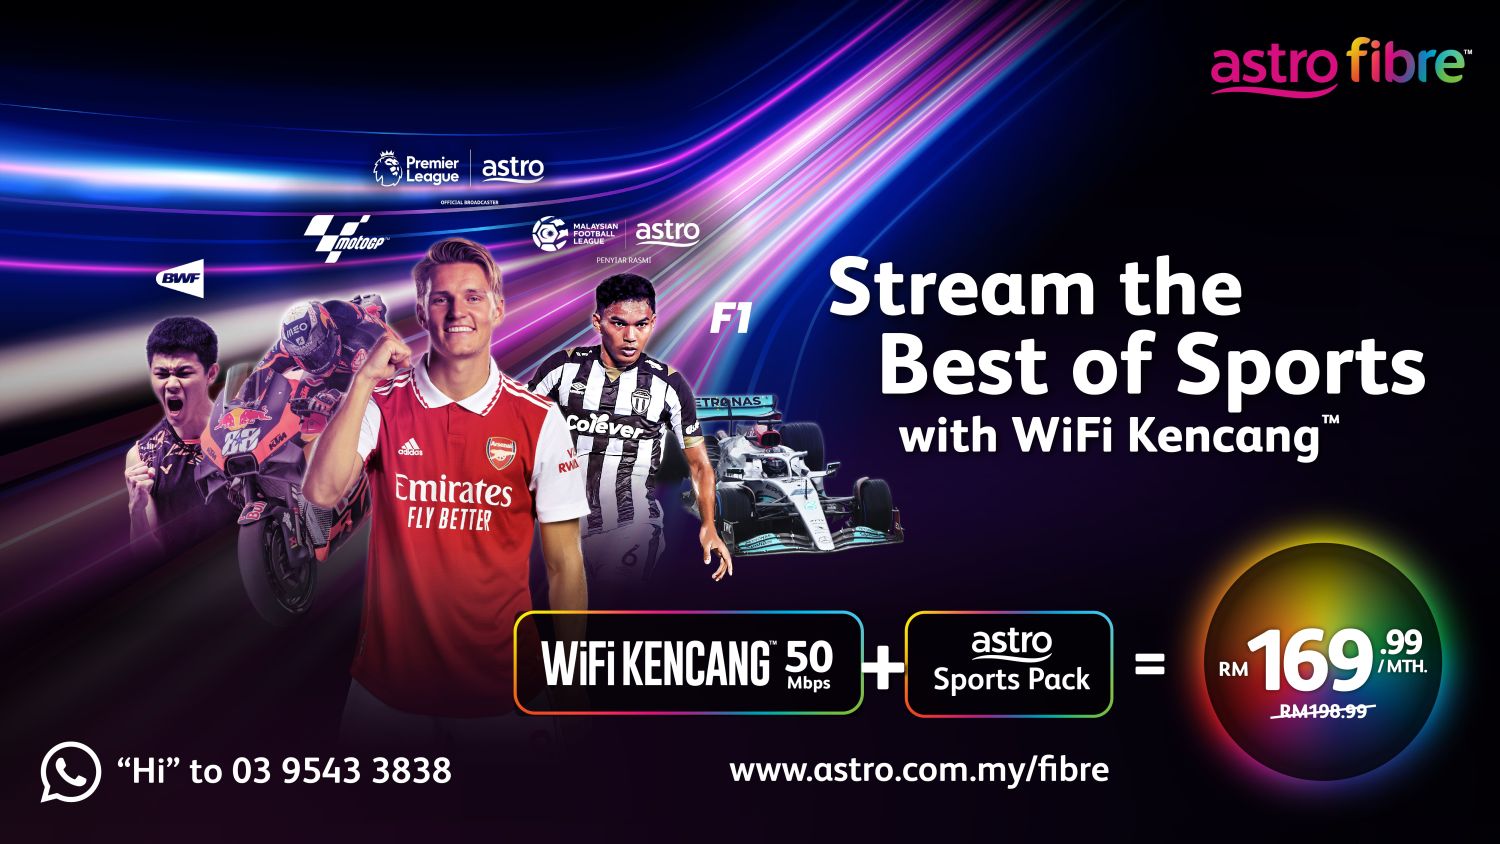 Astro offers Fibre Broadband and Live Sports content bundle from RM169.99/month